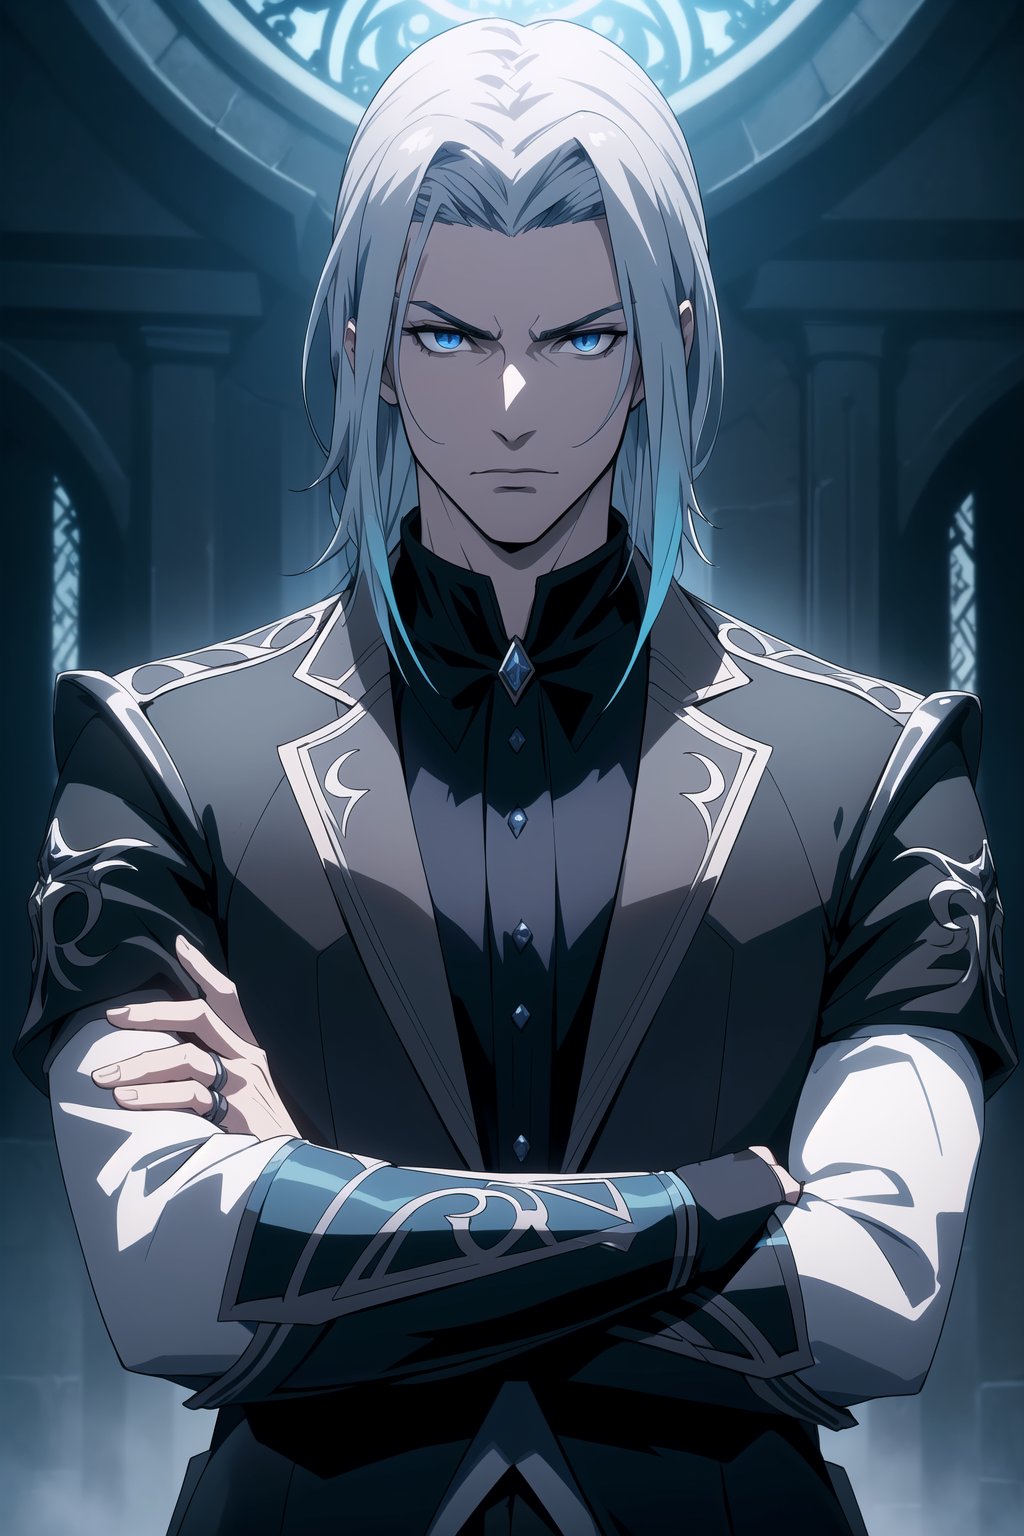 (Masterpiece, Best Quality),  (A Muscular 30-Year-Old Slavic Male Vampire Warrior), (Tousled Icy Blue Hair:1.2), (Pale Skin), (Sharp Blue Eyes), (Wearing Black Formal Attire with Silver Accent:1.4), (Dark Castle Hall at Night:1.4), (Crossed Arms Pose:1.4), Centered, (Half Body Shot:1.4), (From Front Shot:1.4), Insane Details, Intricate Face Detail, Intricate Hand Details, Cinematic Shot and Lighting, Realistic and Vibrant Colors, Sharp Focus, Ultra Detailed, Realistic Images, Depth of Field, Incredibly Realistic Environment and Scene, Master Composition and Cinematography,castlevania style